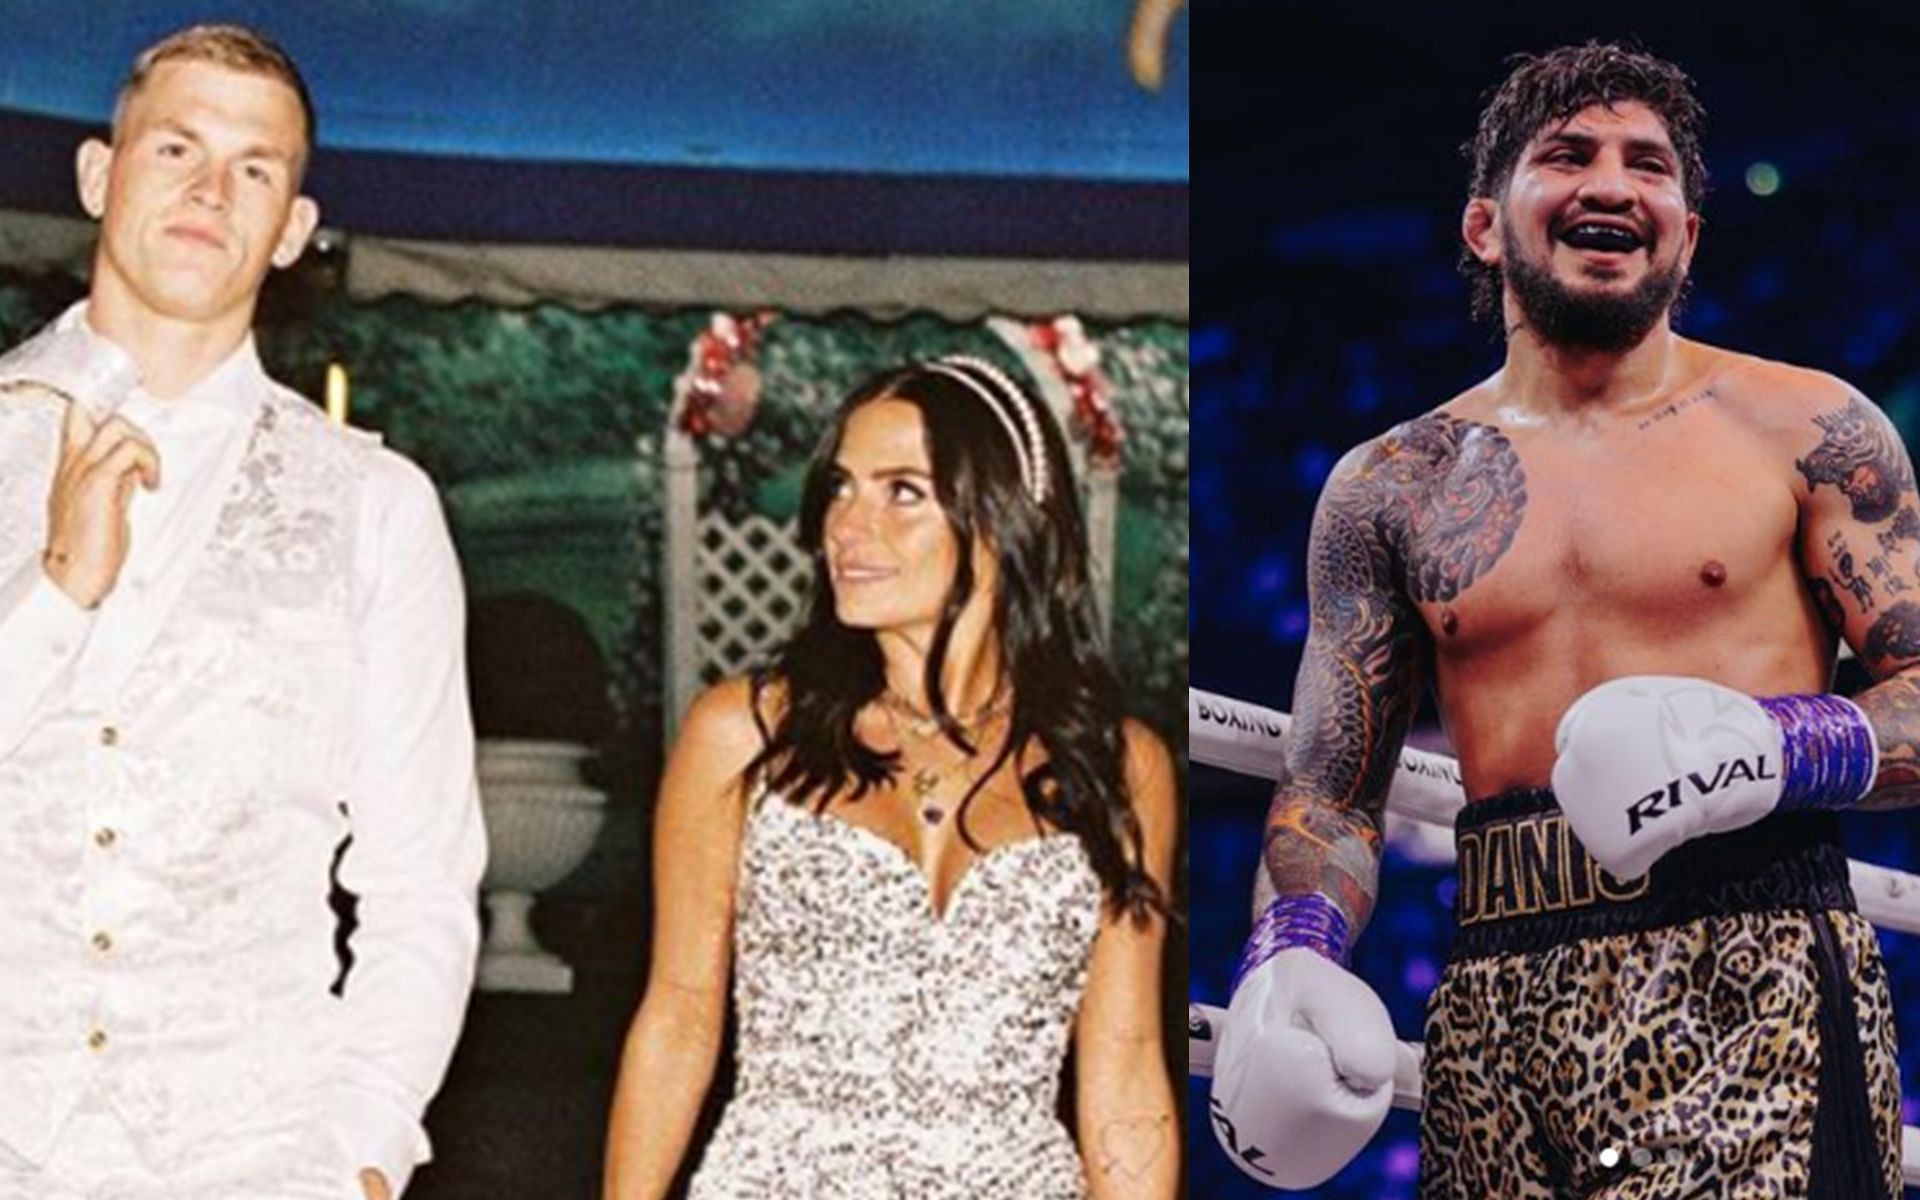 Ian Garry (Left) with his wife Layla (Center) and Dillon Danis (Right) (Images Courtesy: @laylaannalee and @dillondanis Instagram)